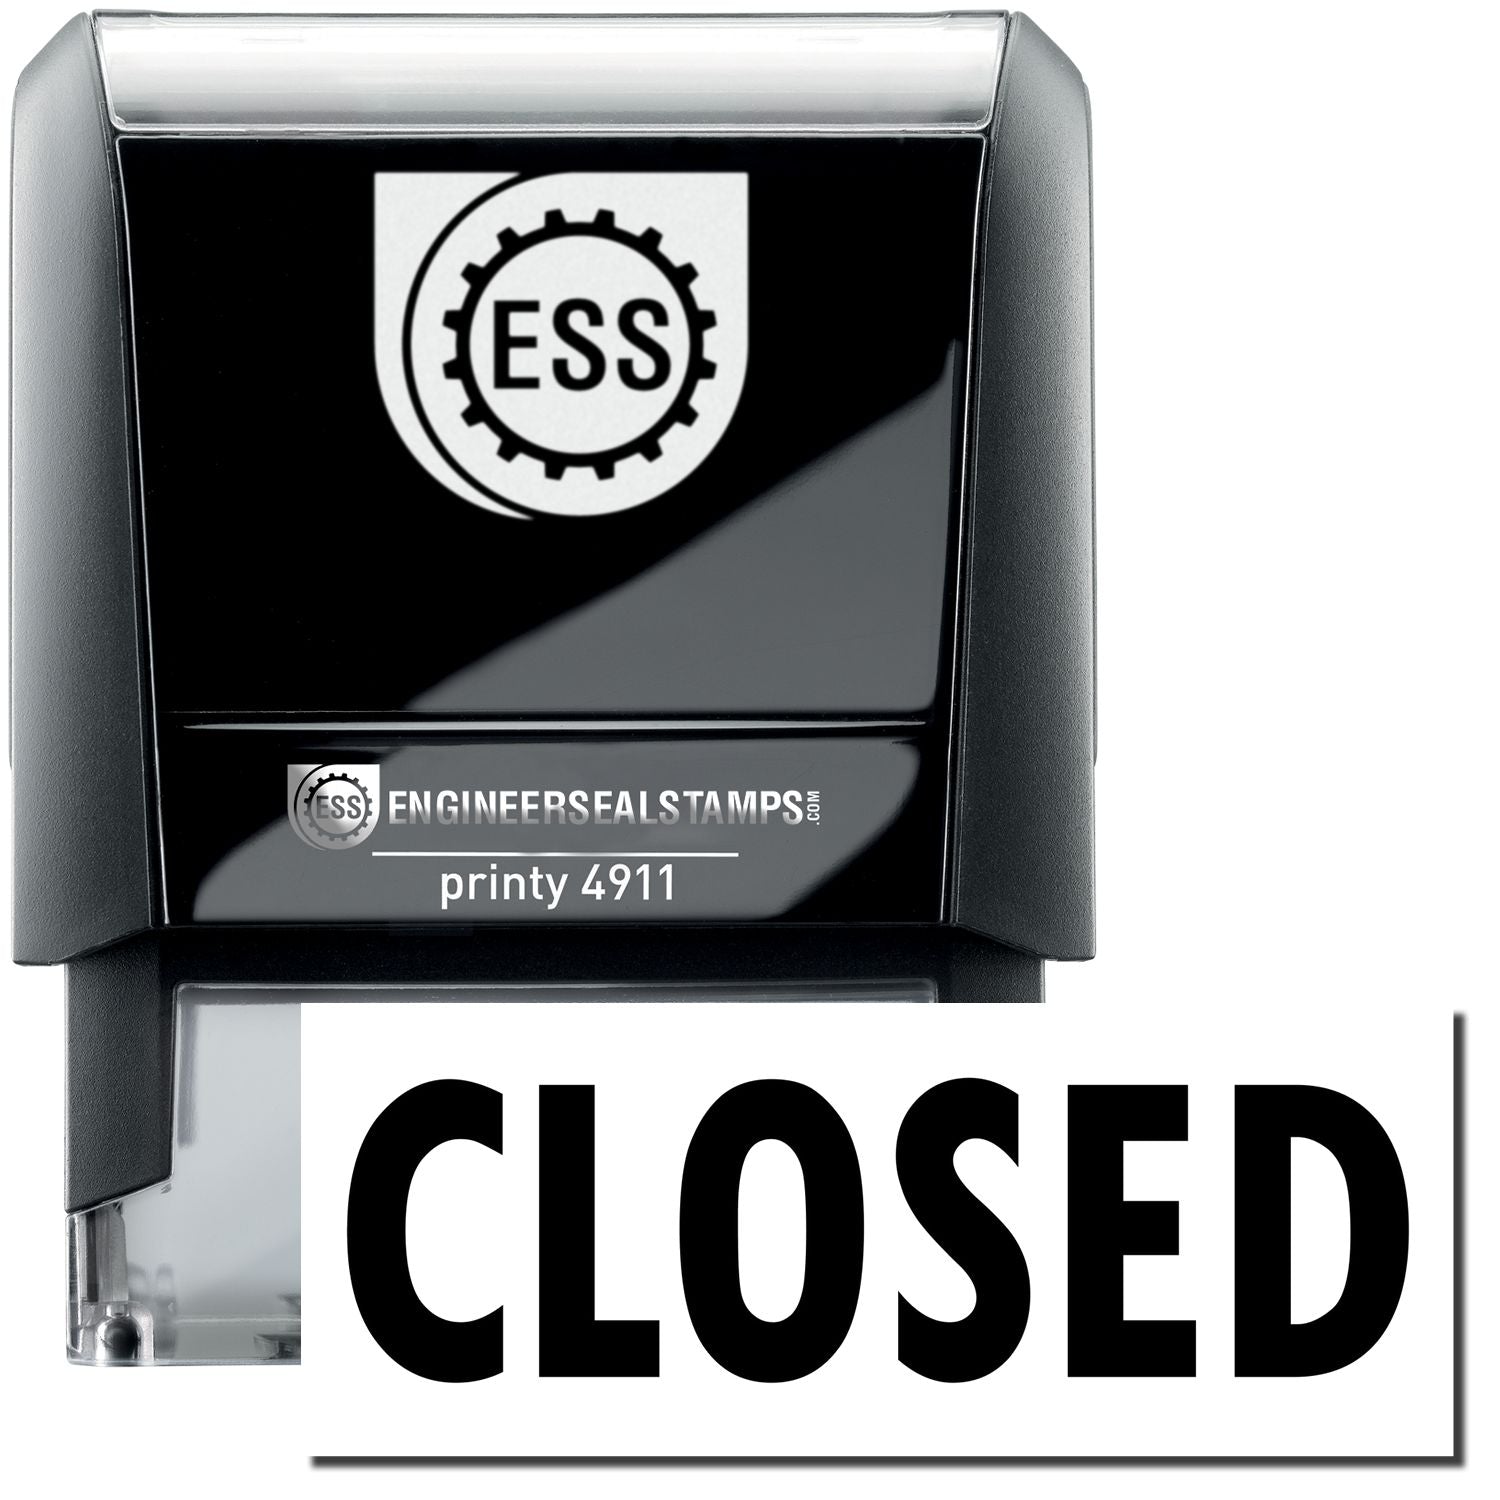 A self-inking stamp with a stamped image showing how the text "CLOSED" is displayed after stamping.